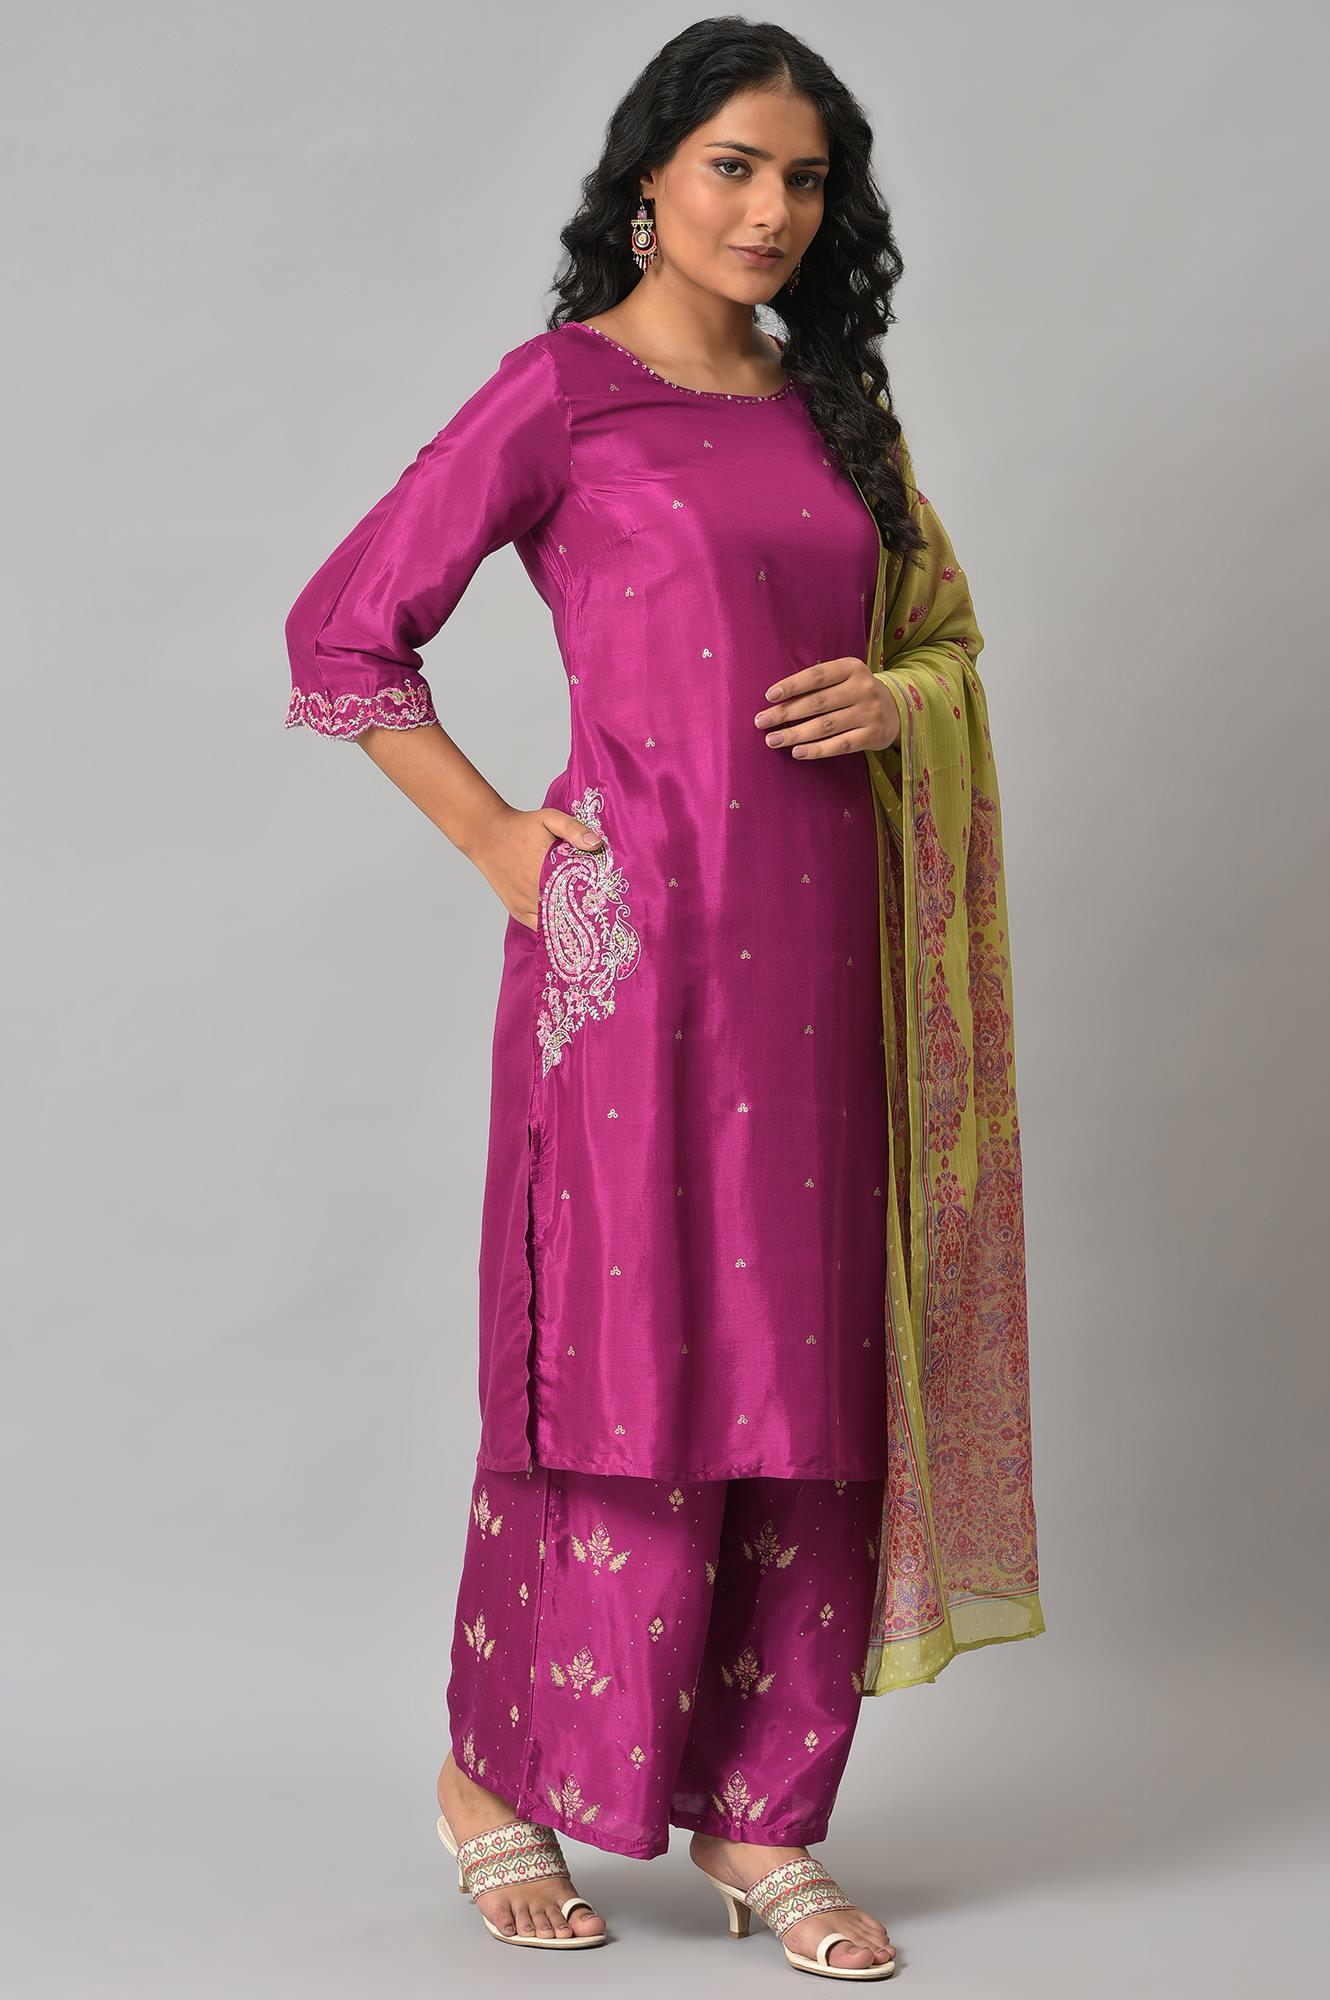 Puruple Shatung Embroidered kurta With Parallel Pants And Light Green Dupatta - wforwoman